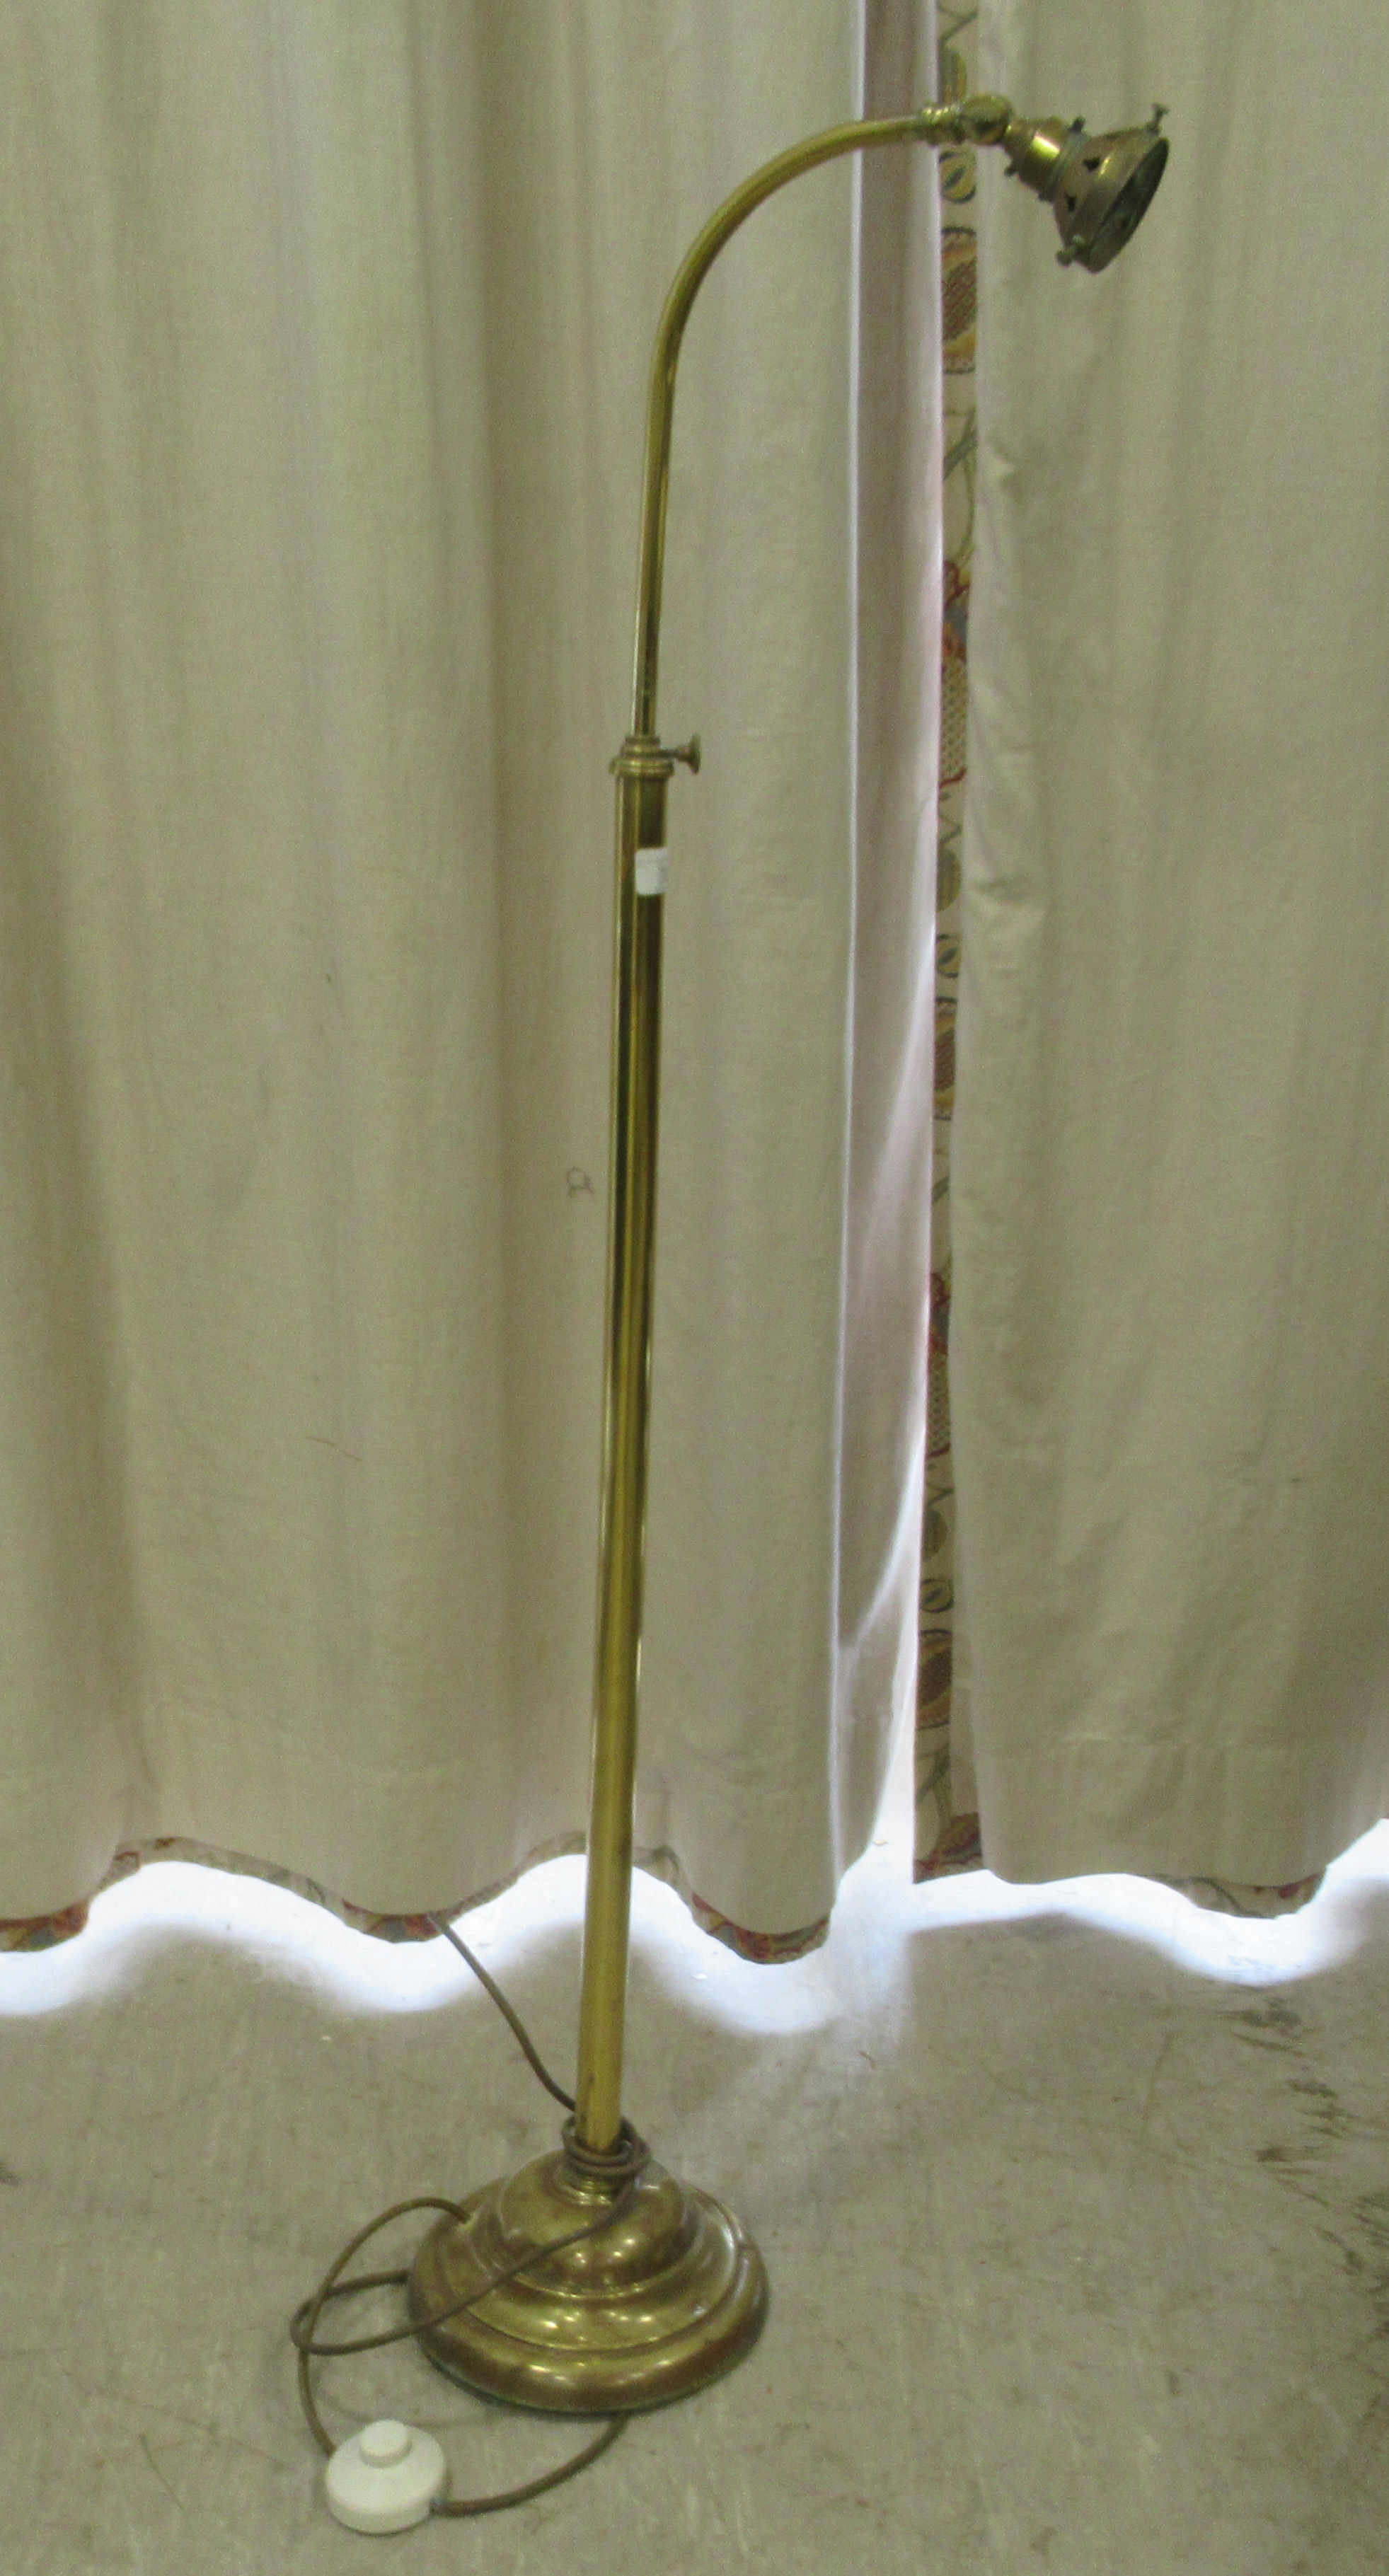 A mid 20thC lacquered brass telescopic standard lamp with an arched arm, accommodating a green glass